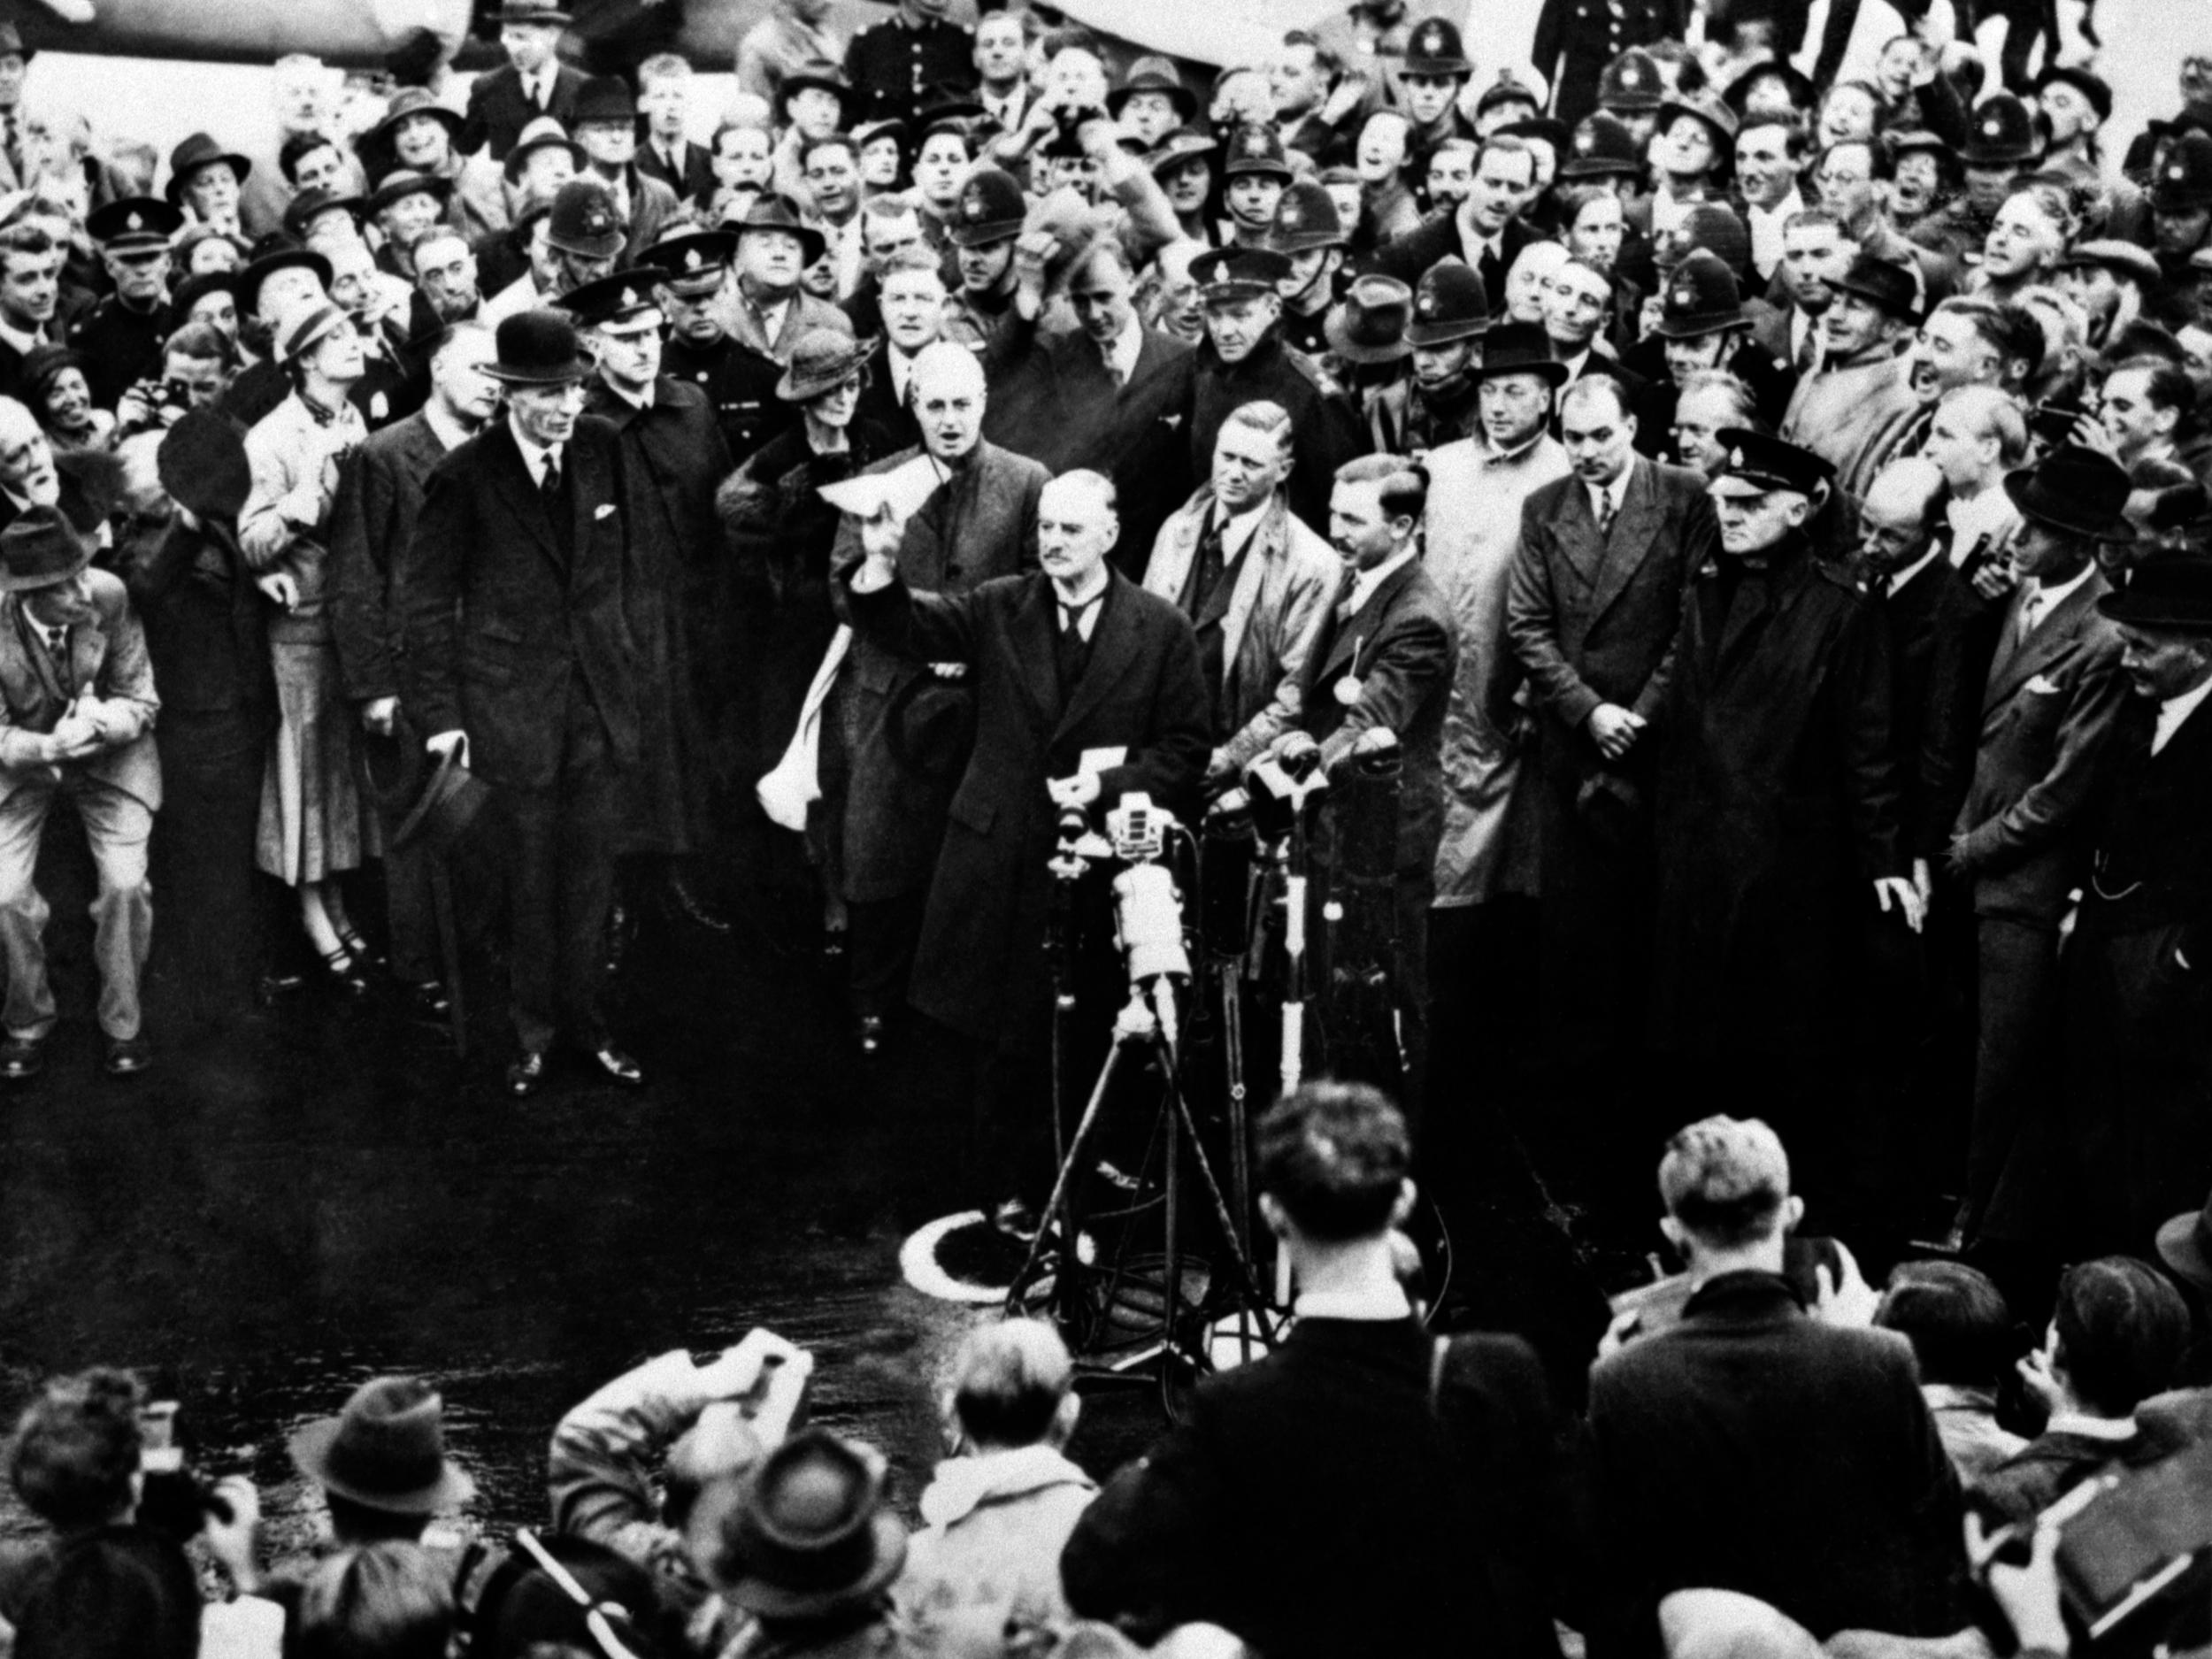 Chamberlain makes his famous ‘Peace in Our Time’ speech after returning from talks with Hitler in Munich